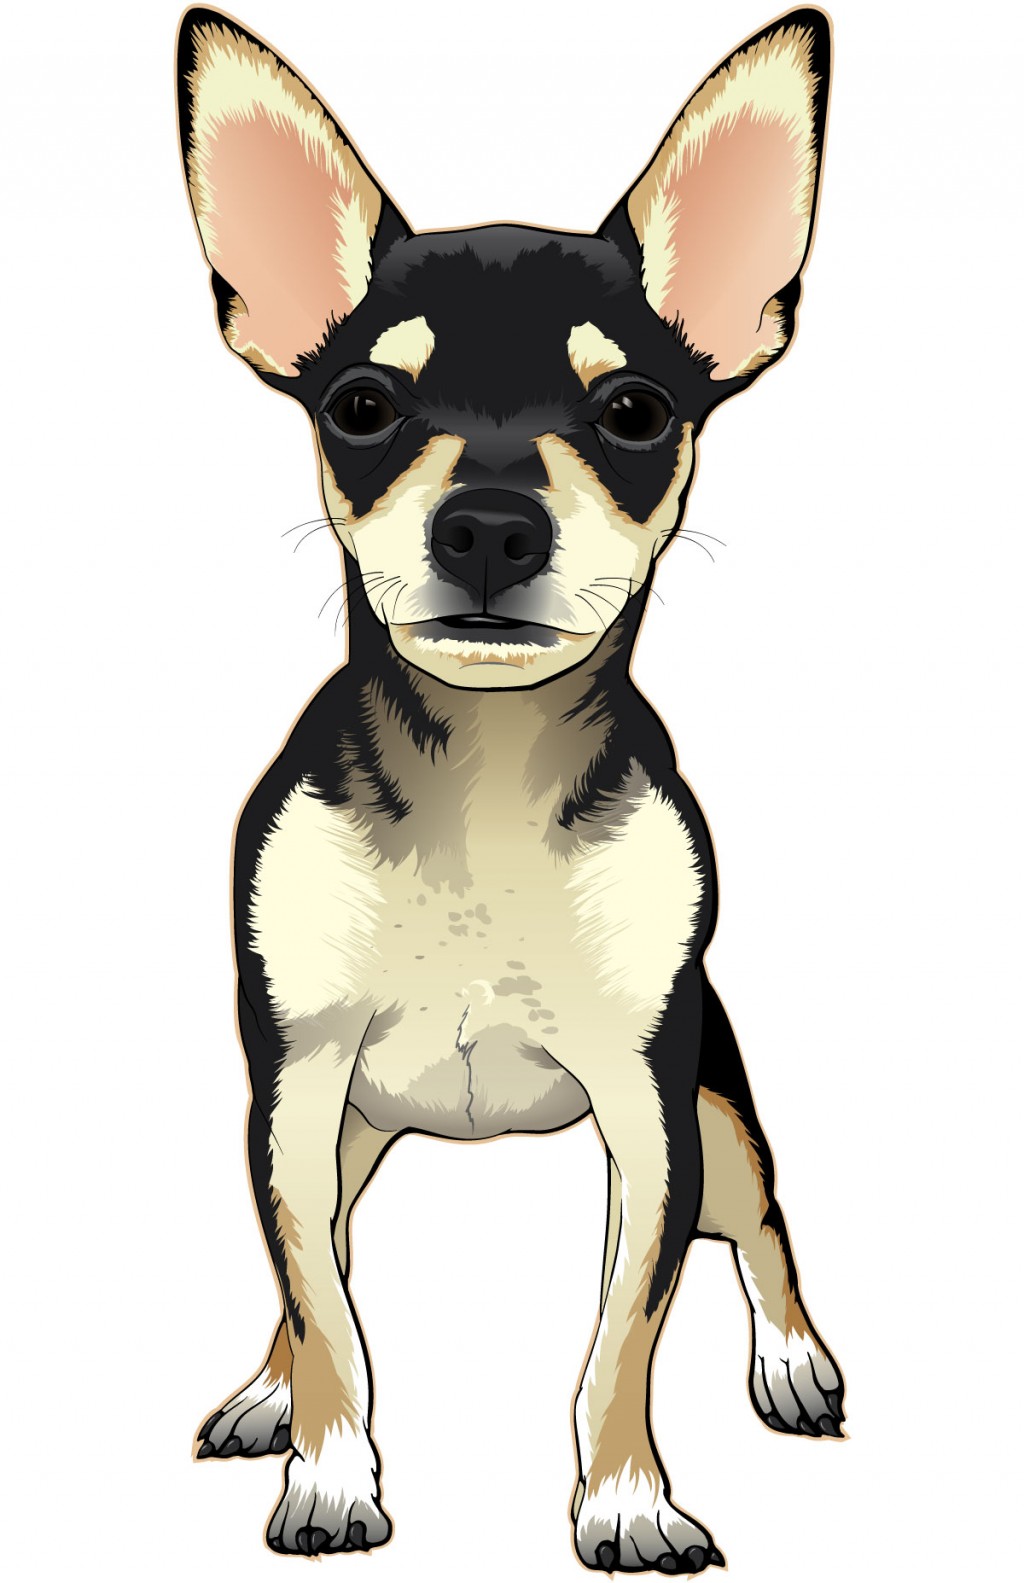 Color illustration of a black and tan chihuahua puppy.